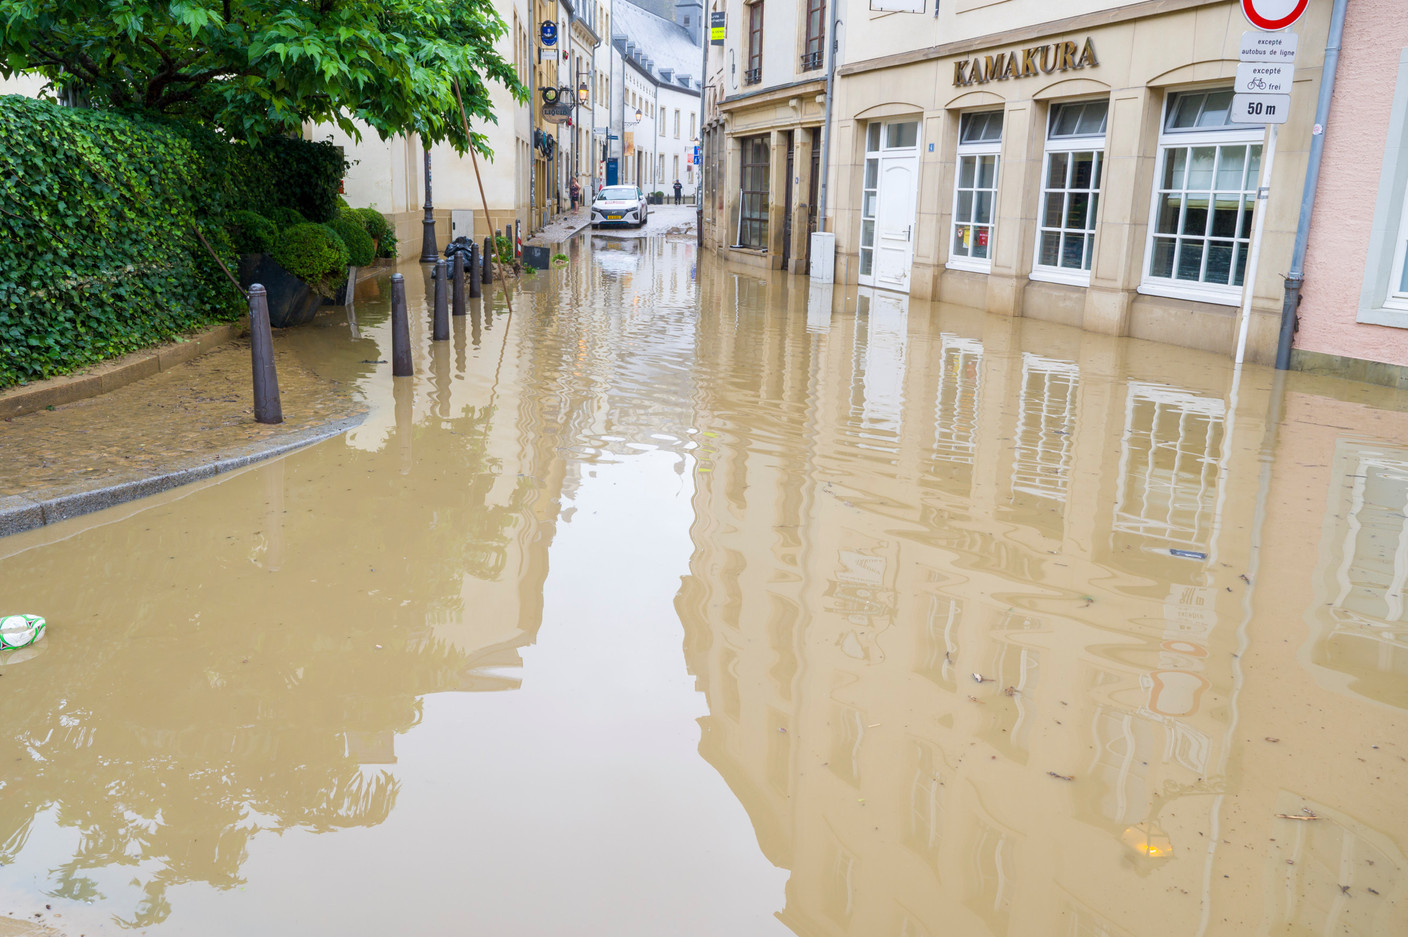 Insurers were seized of 6,500 damages to homes and businesses and 1,300 cases of flooded vehicles. (Photo: SIP/Jean-Christophe Verhaegen)